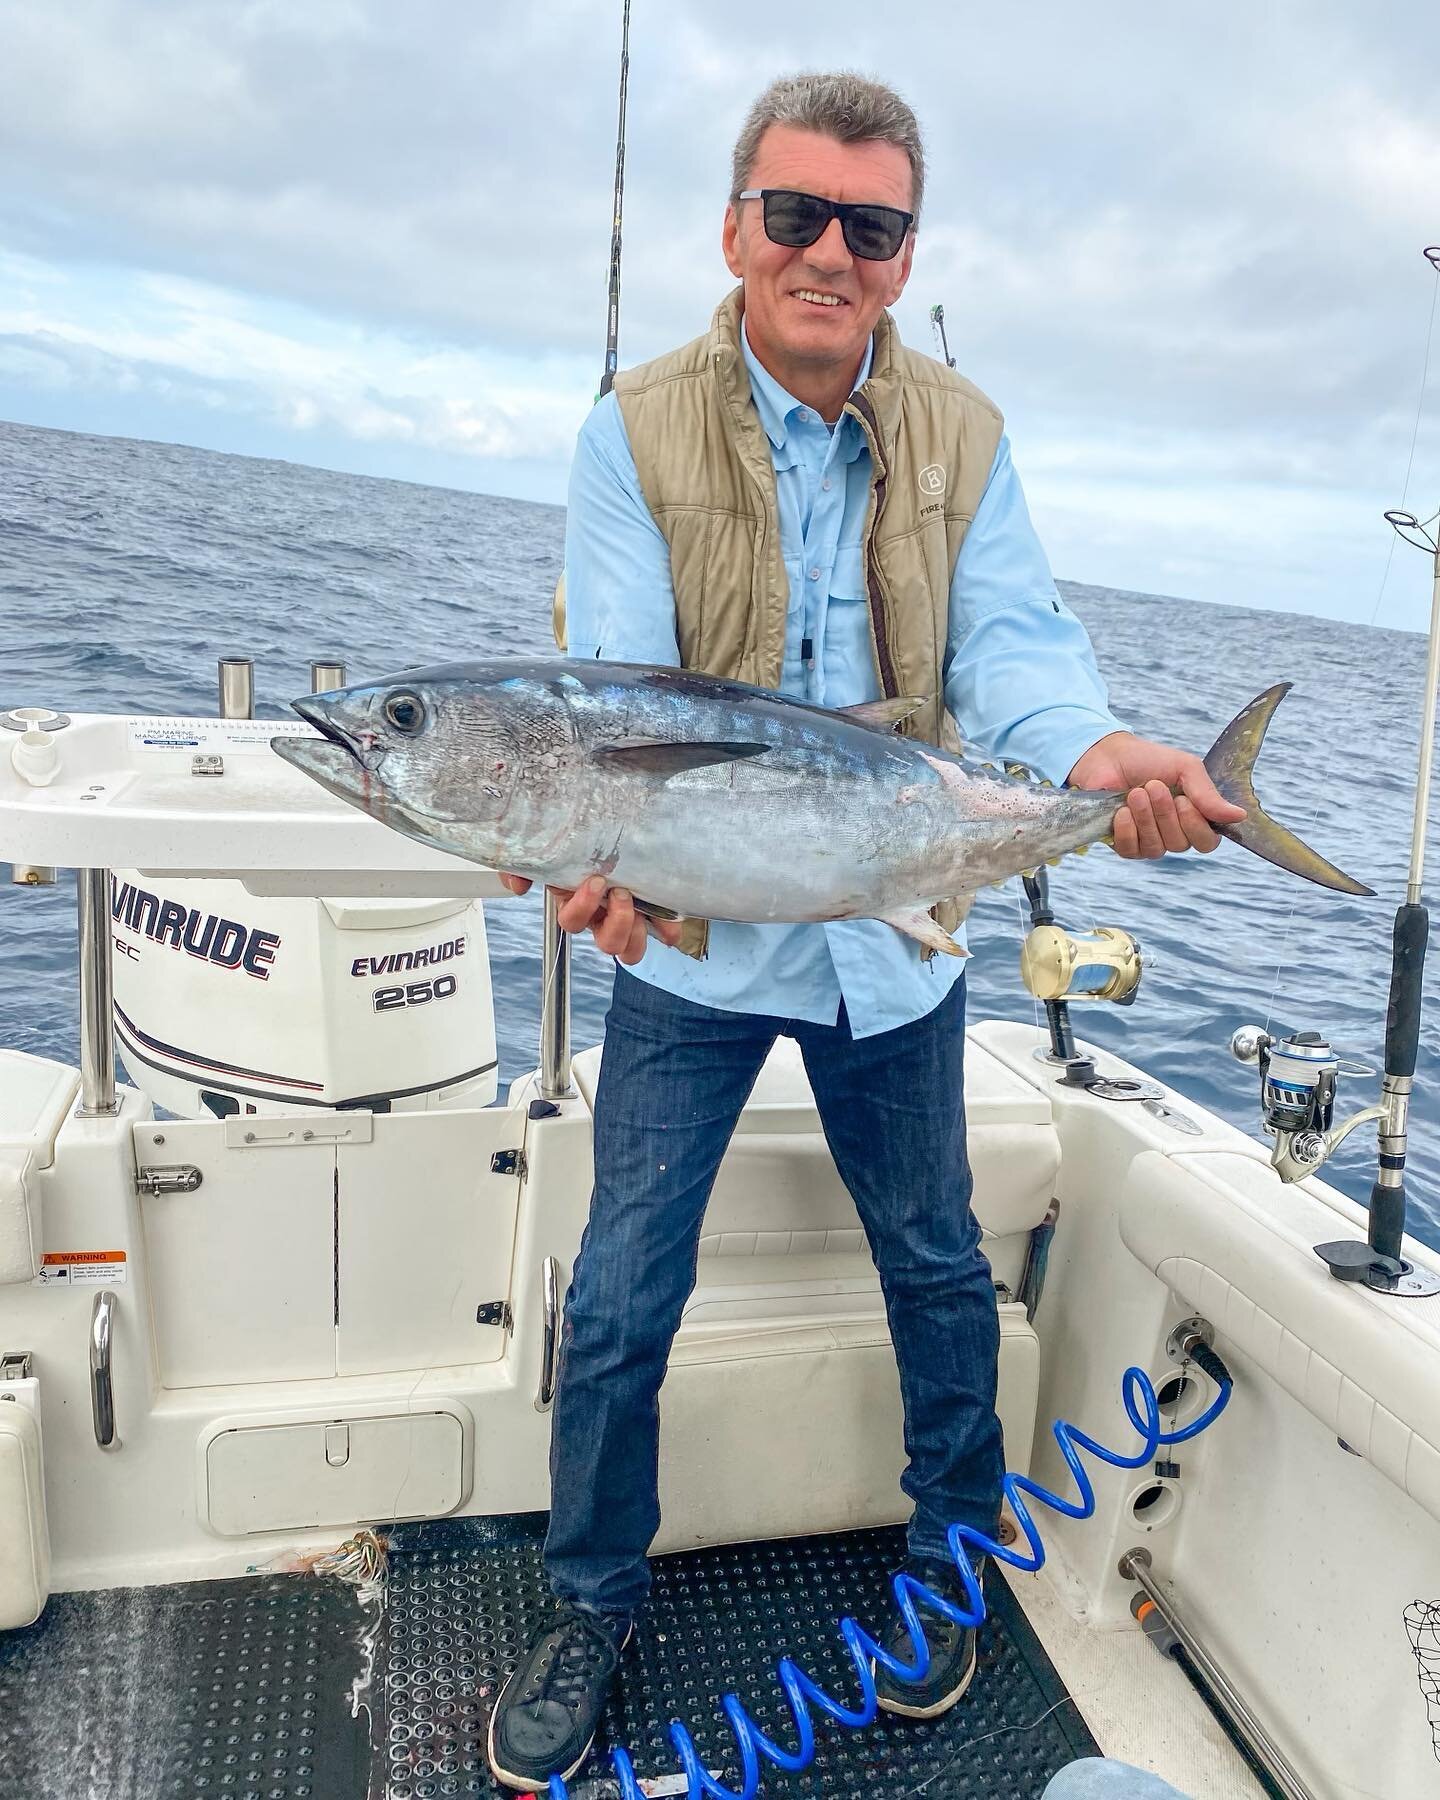 The best part of our job at NMO is seeing our clients doing what they love!
Here our client is wearing his NeuroSwing H2O (AFO) whilst fishing for Tuna in the Bass Straight off the coast of Portland, Victoria. 
Achieving goals and maintaining hobbies